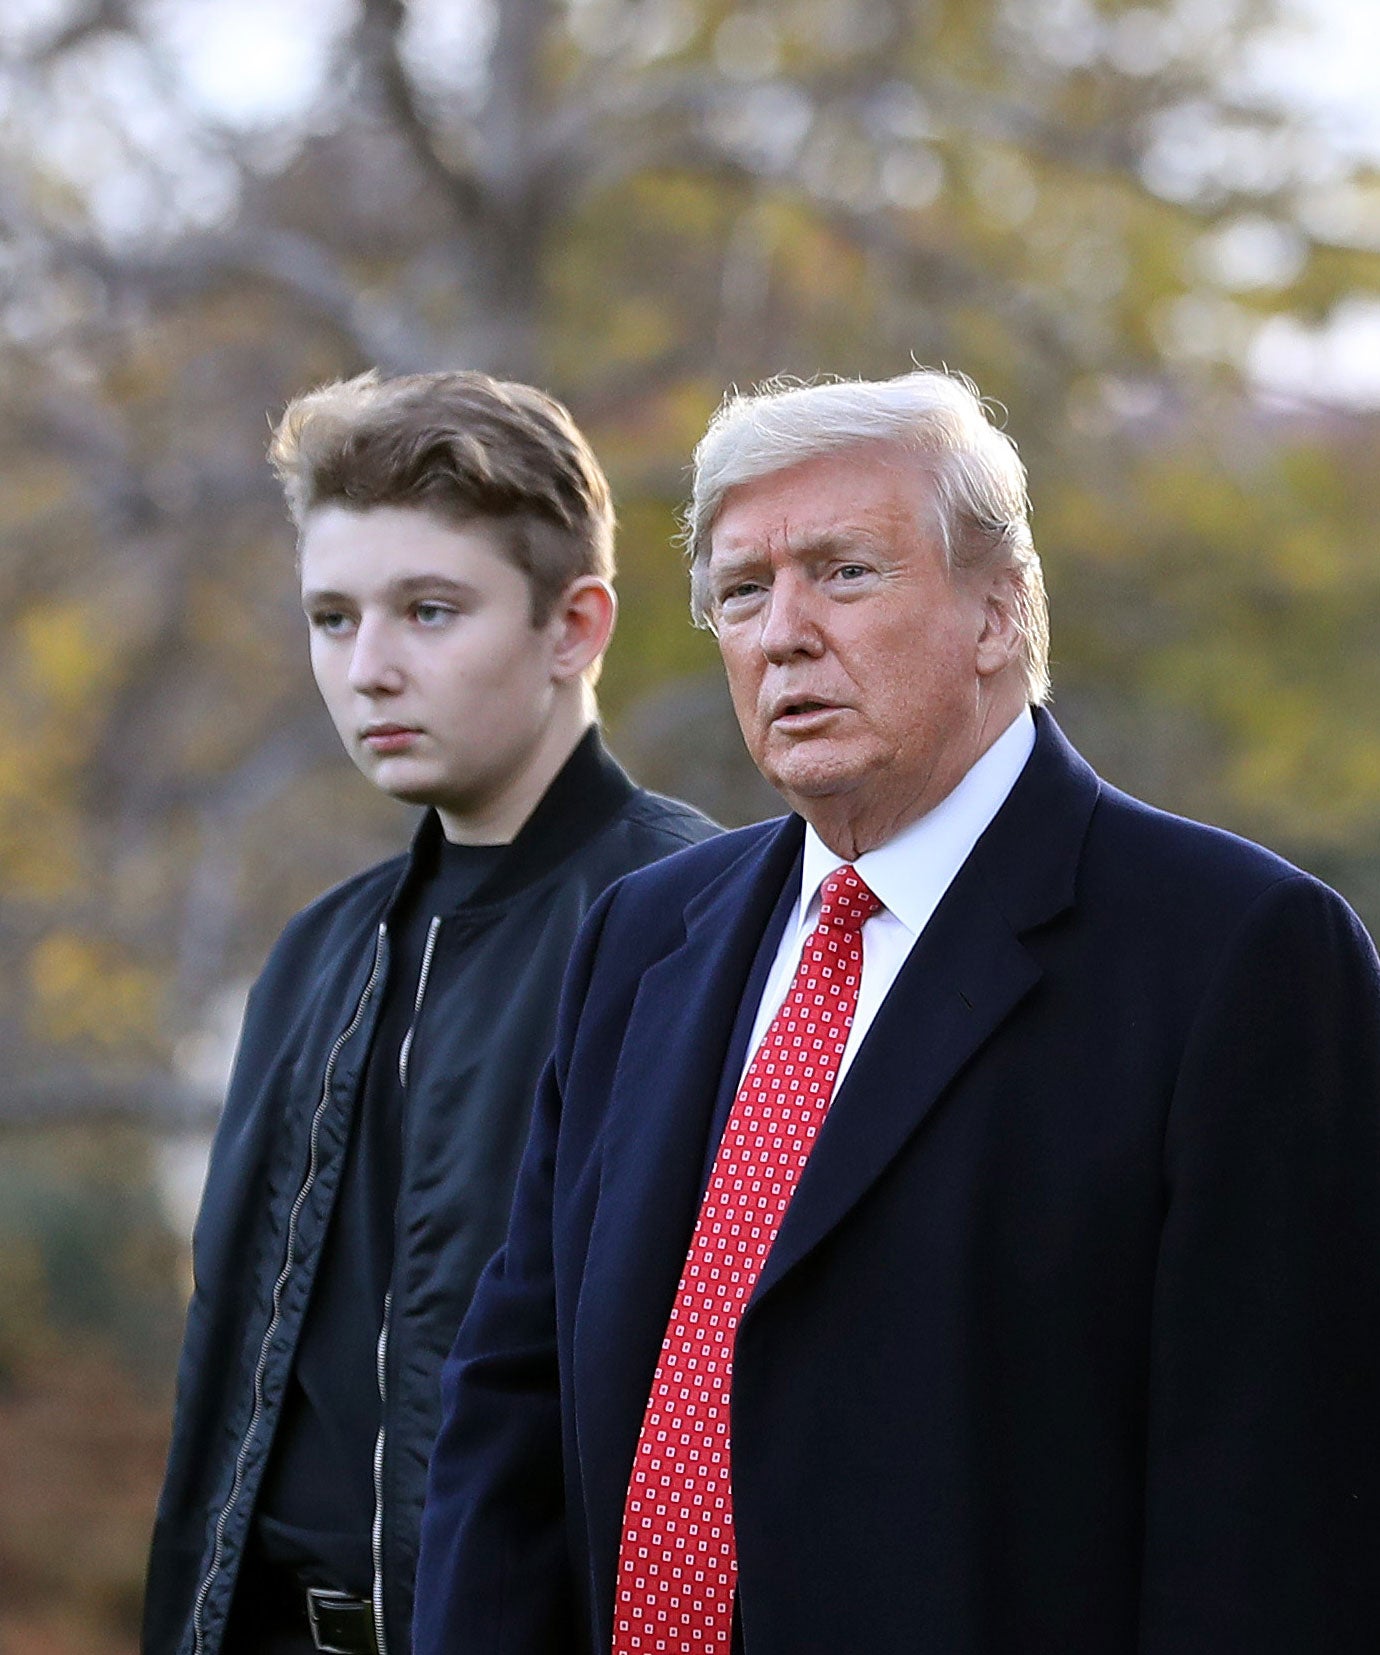 What To Know About Save Barron Trump Roblox Conspiracy - supporter comments roblox make roblox great again by removing